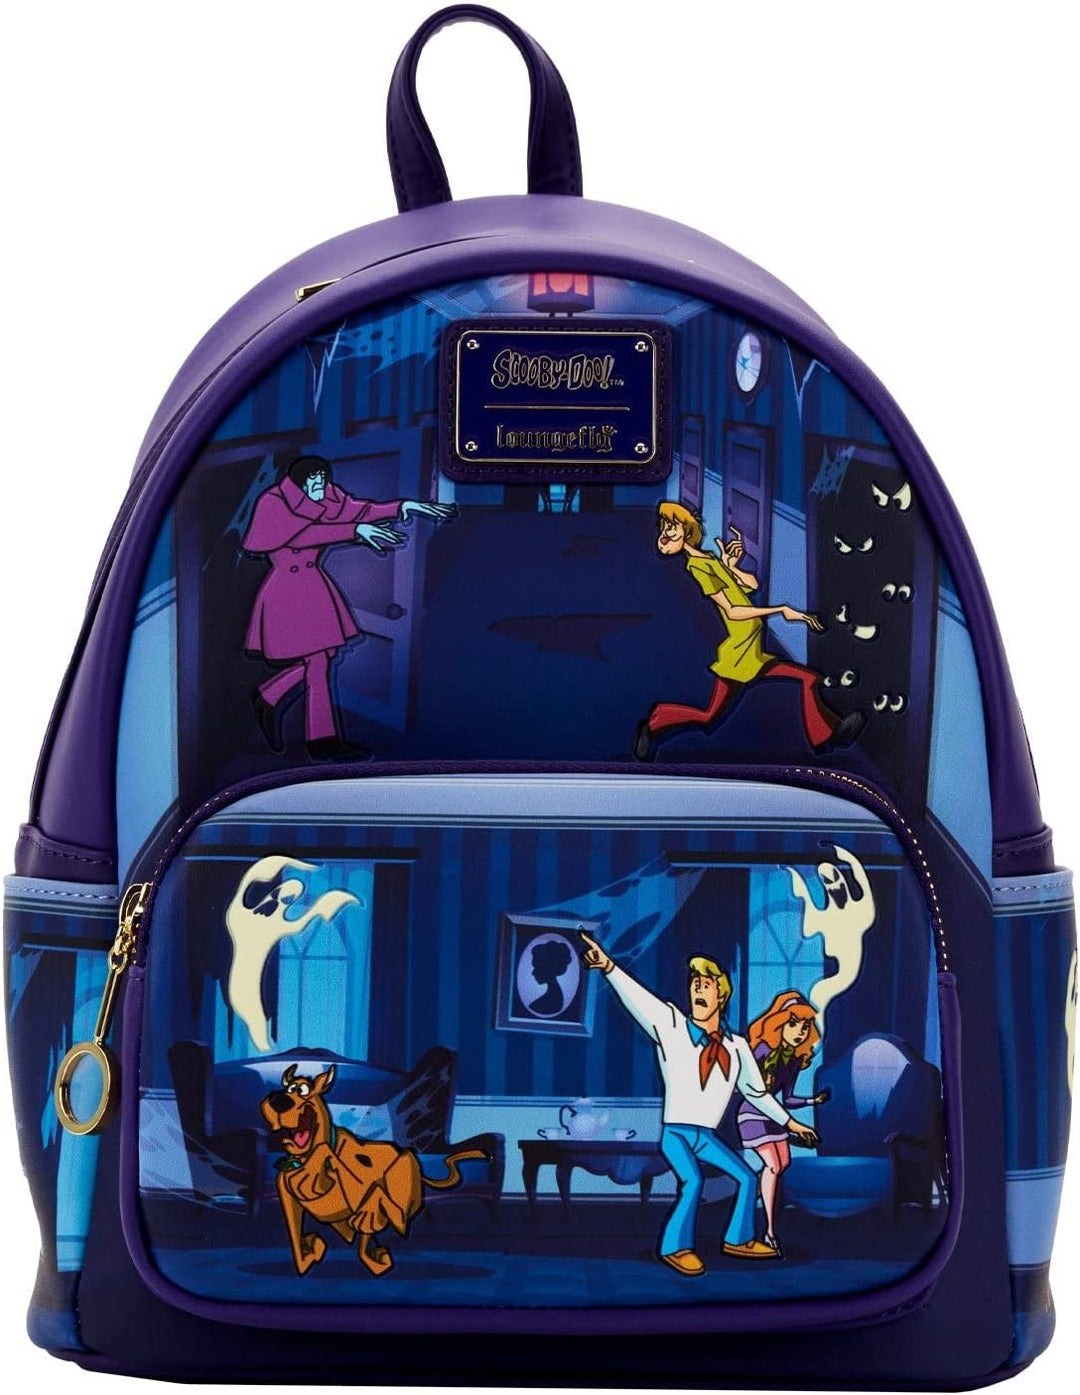 Loungefly Scooby Doo Monster Chase Womens Double Strap Shoulder Bag Purse Backpack